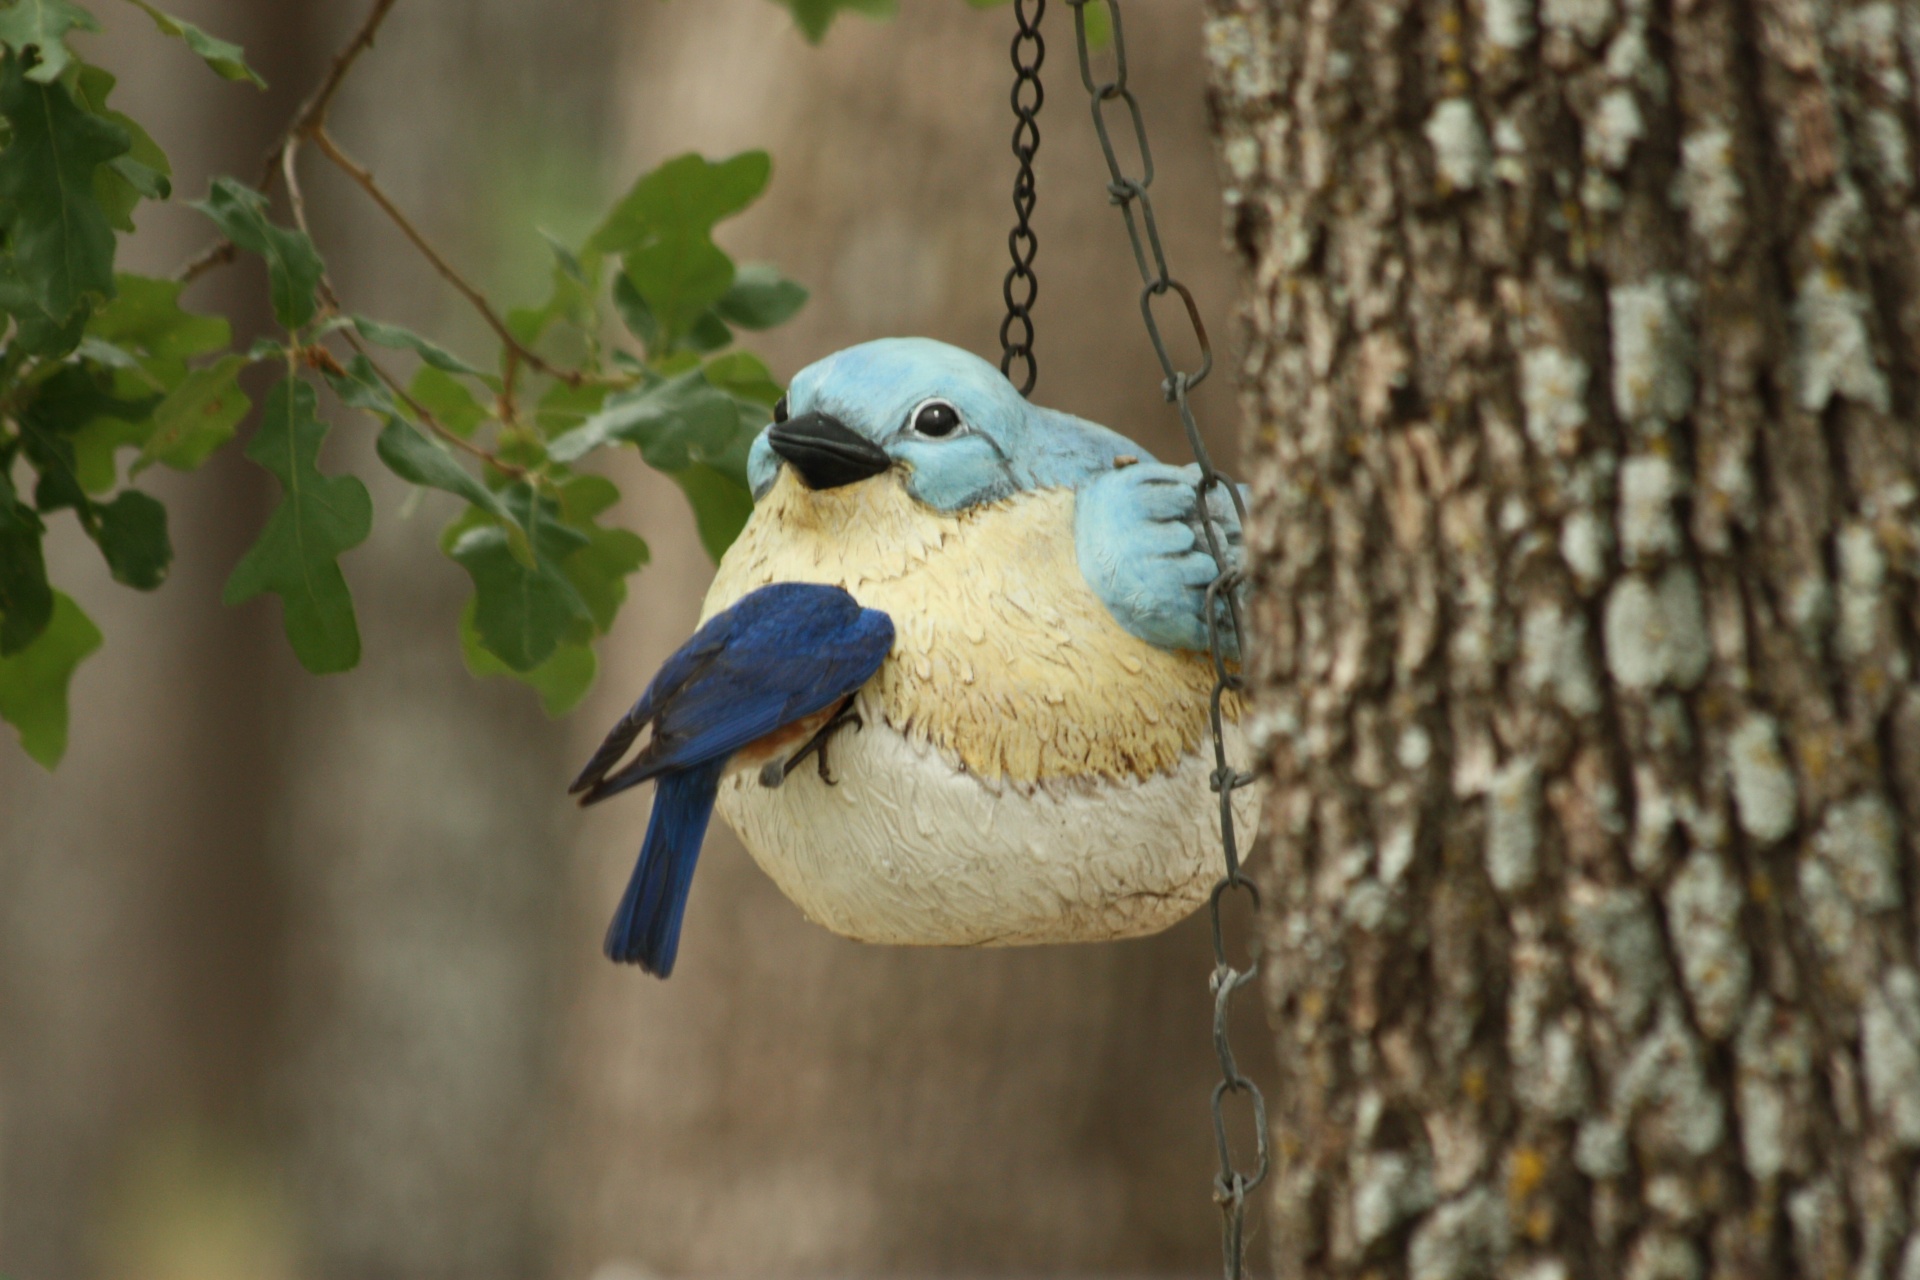 A bright blue male bluebird has his head inside a hanging bluebird house as if he is checking to see if there is anyone home.